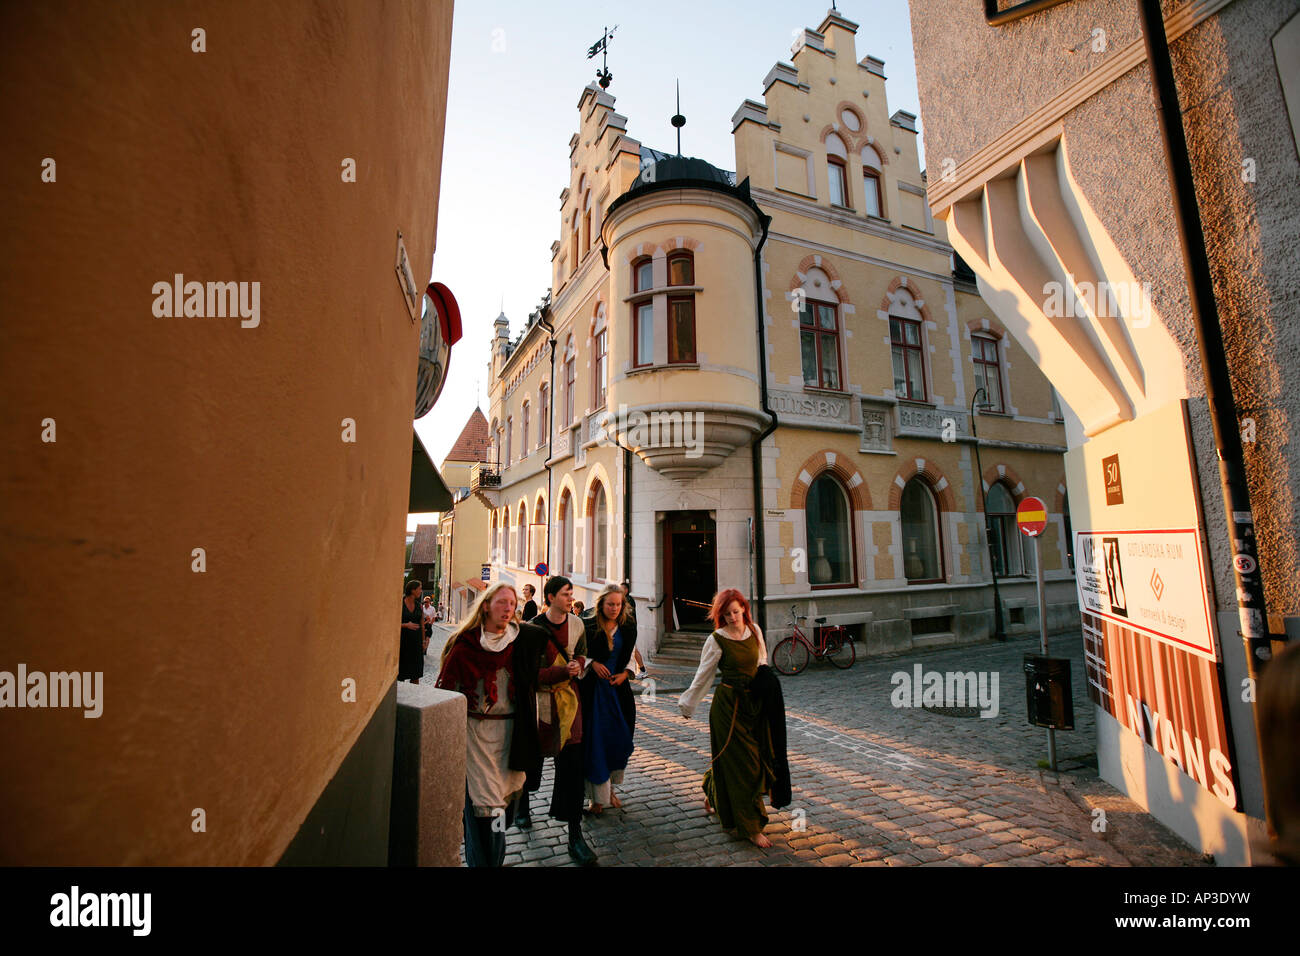 People, pedestrians walking down the street in fancy dress during medievel week, old town, Visby, Gotland, Sweden Stock Photo